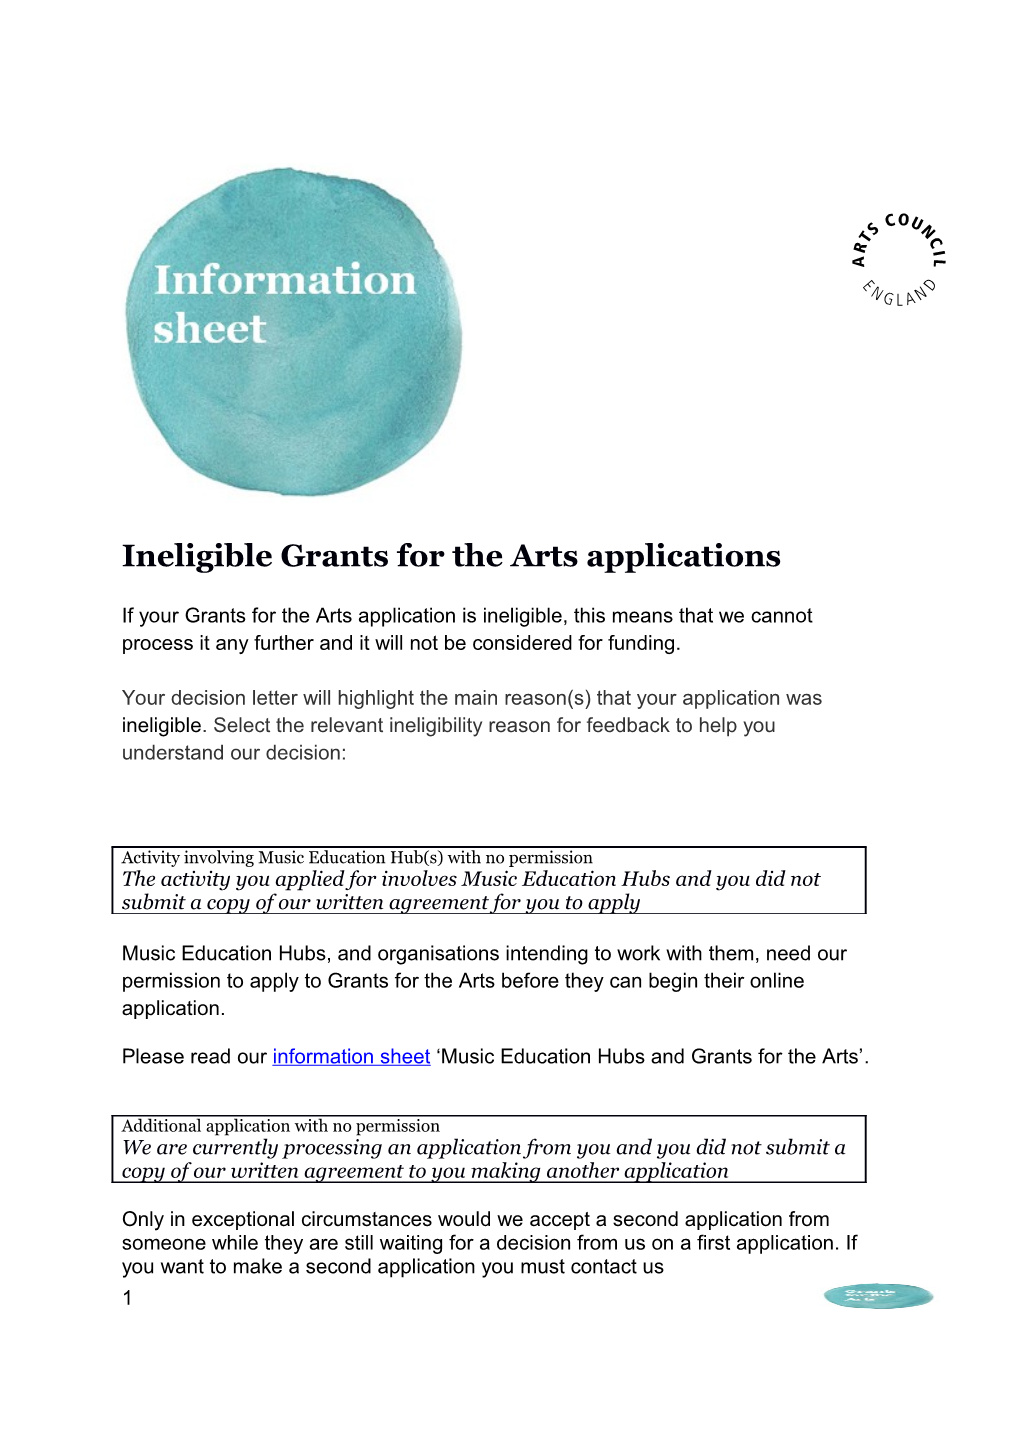 Ineligible Grants for the Arts Applications